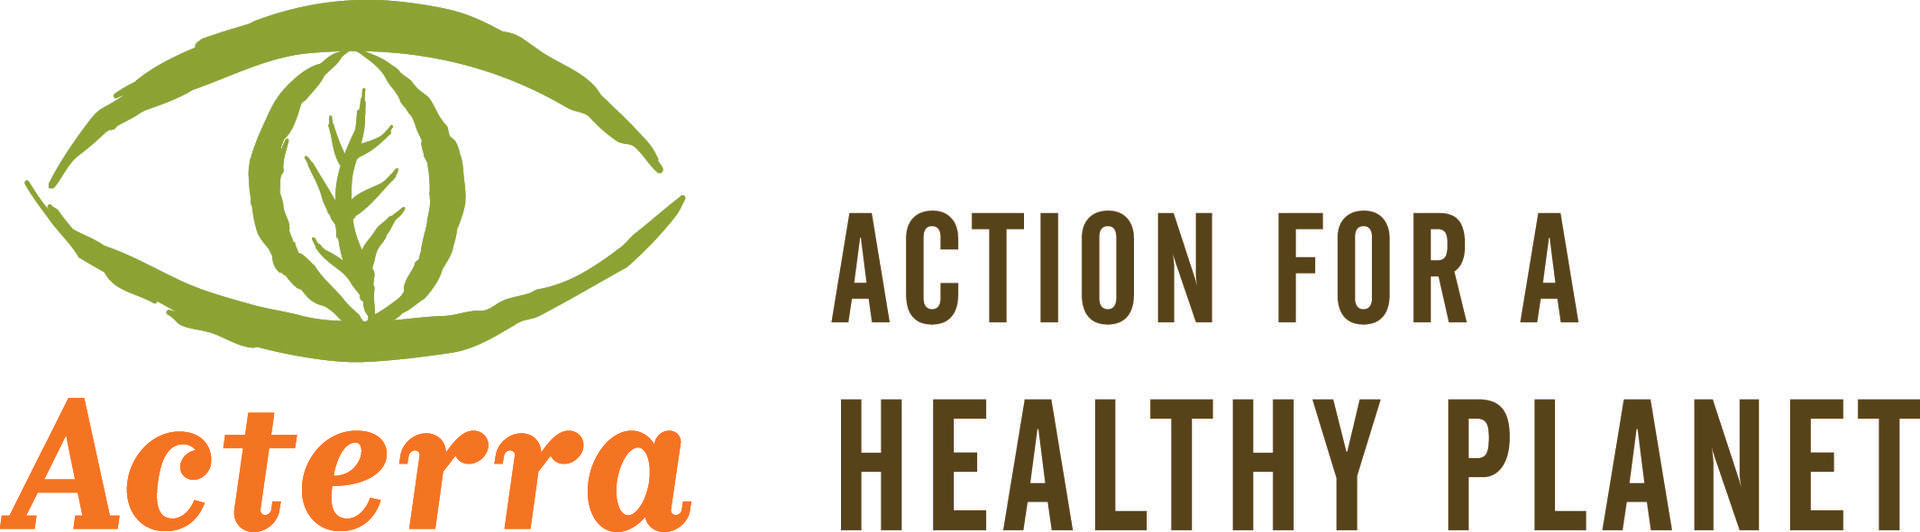 Acterra Action for a Healthy Planet